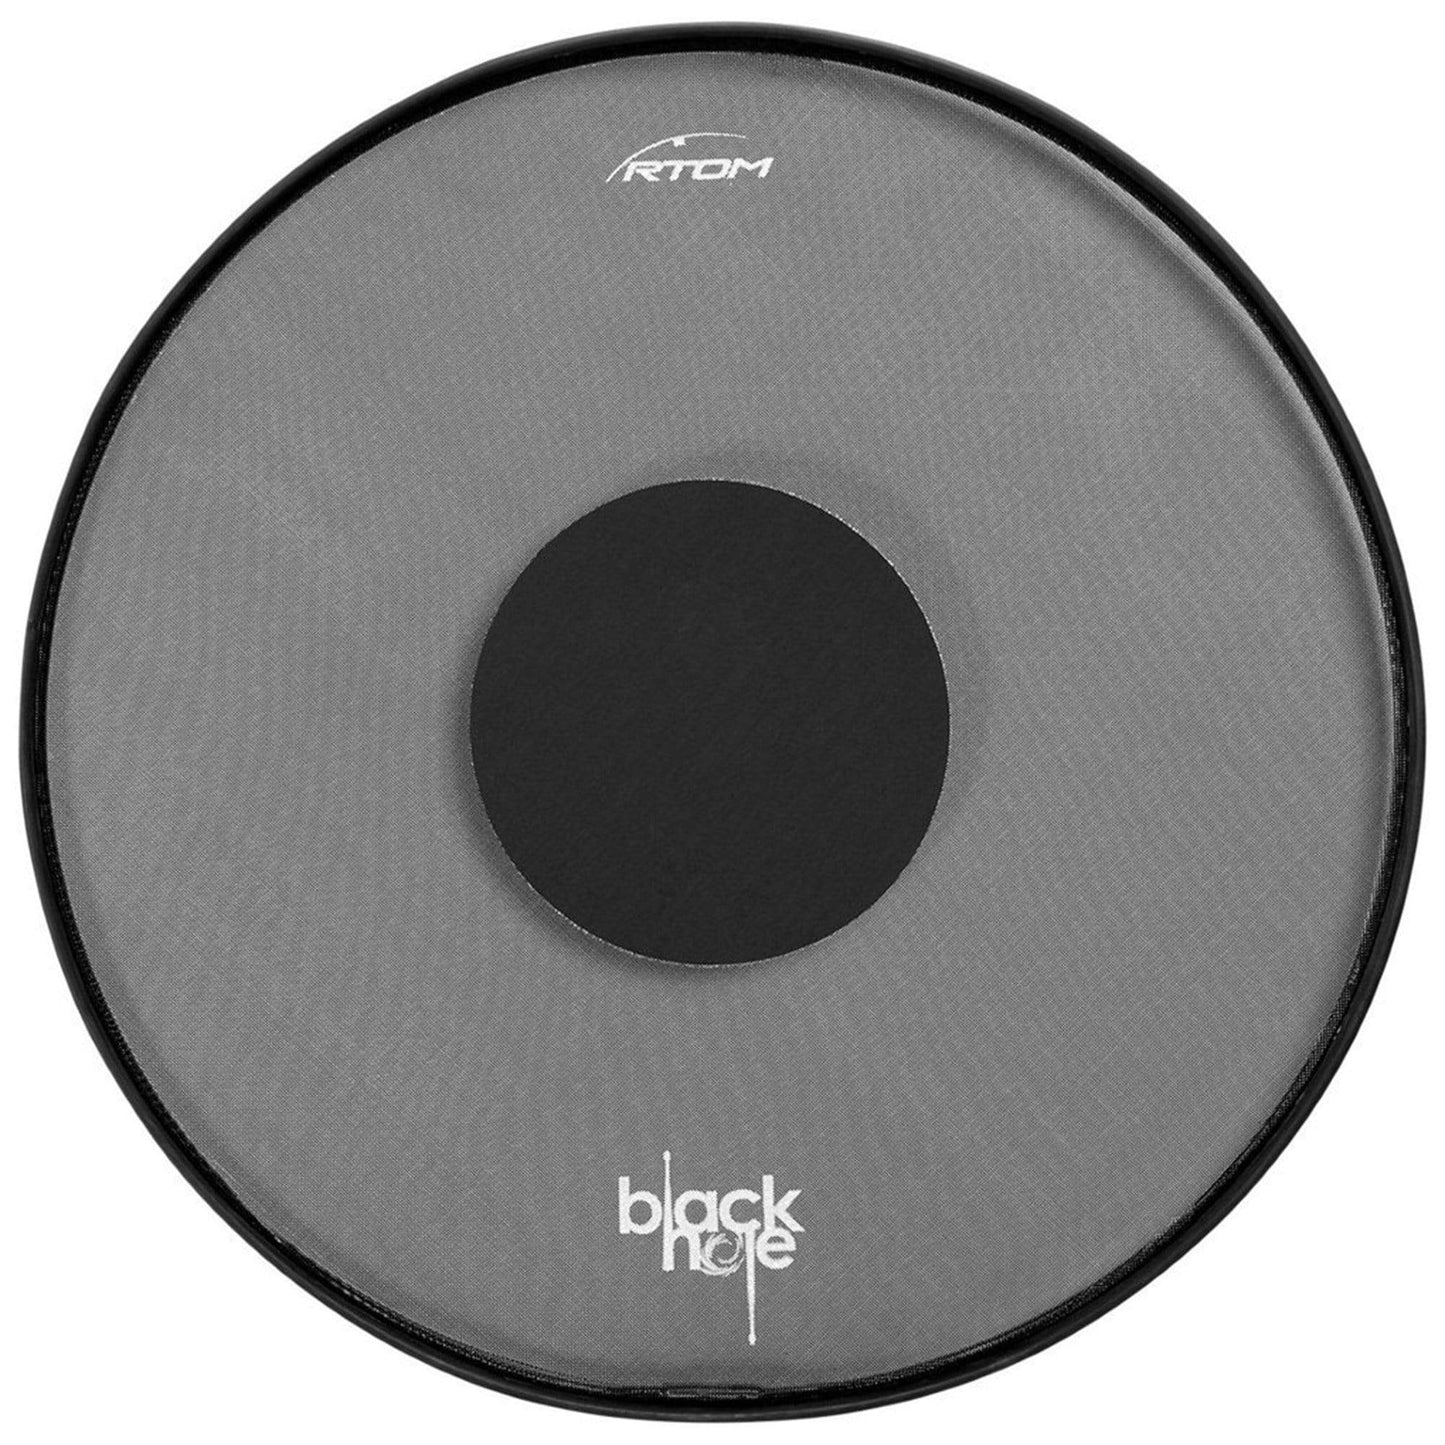 RTOM Black Hole Practice Pad 22" Drums and Percussion